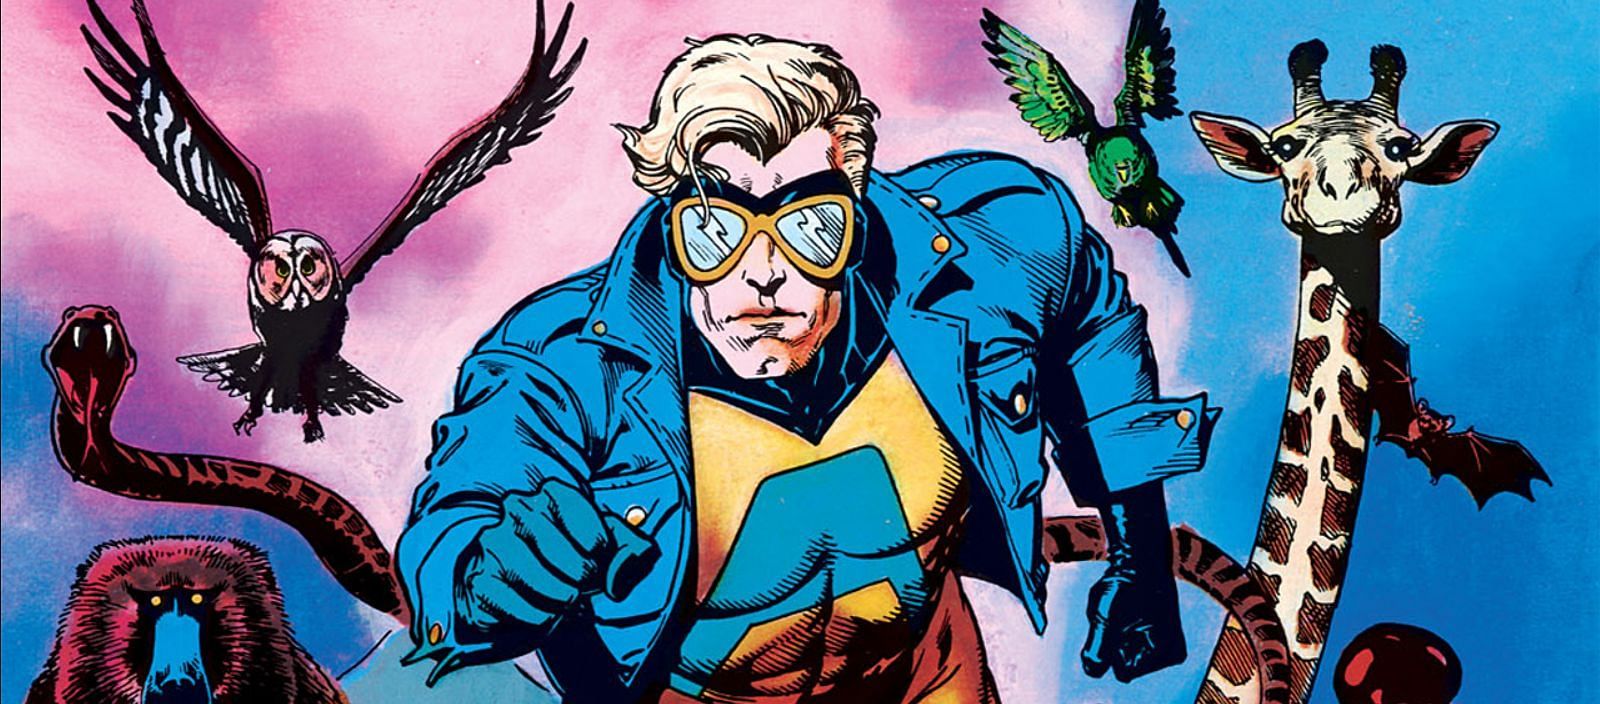 Writer Grant Morrison has Animal Man frequently break the Fourth Wall in his series, and eventually had Baker meet Morrison. (Art by Brian Bolland)